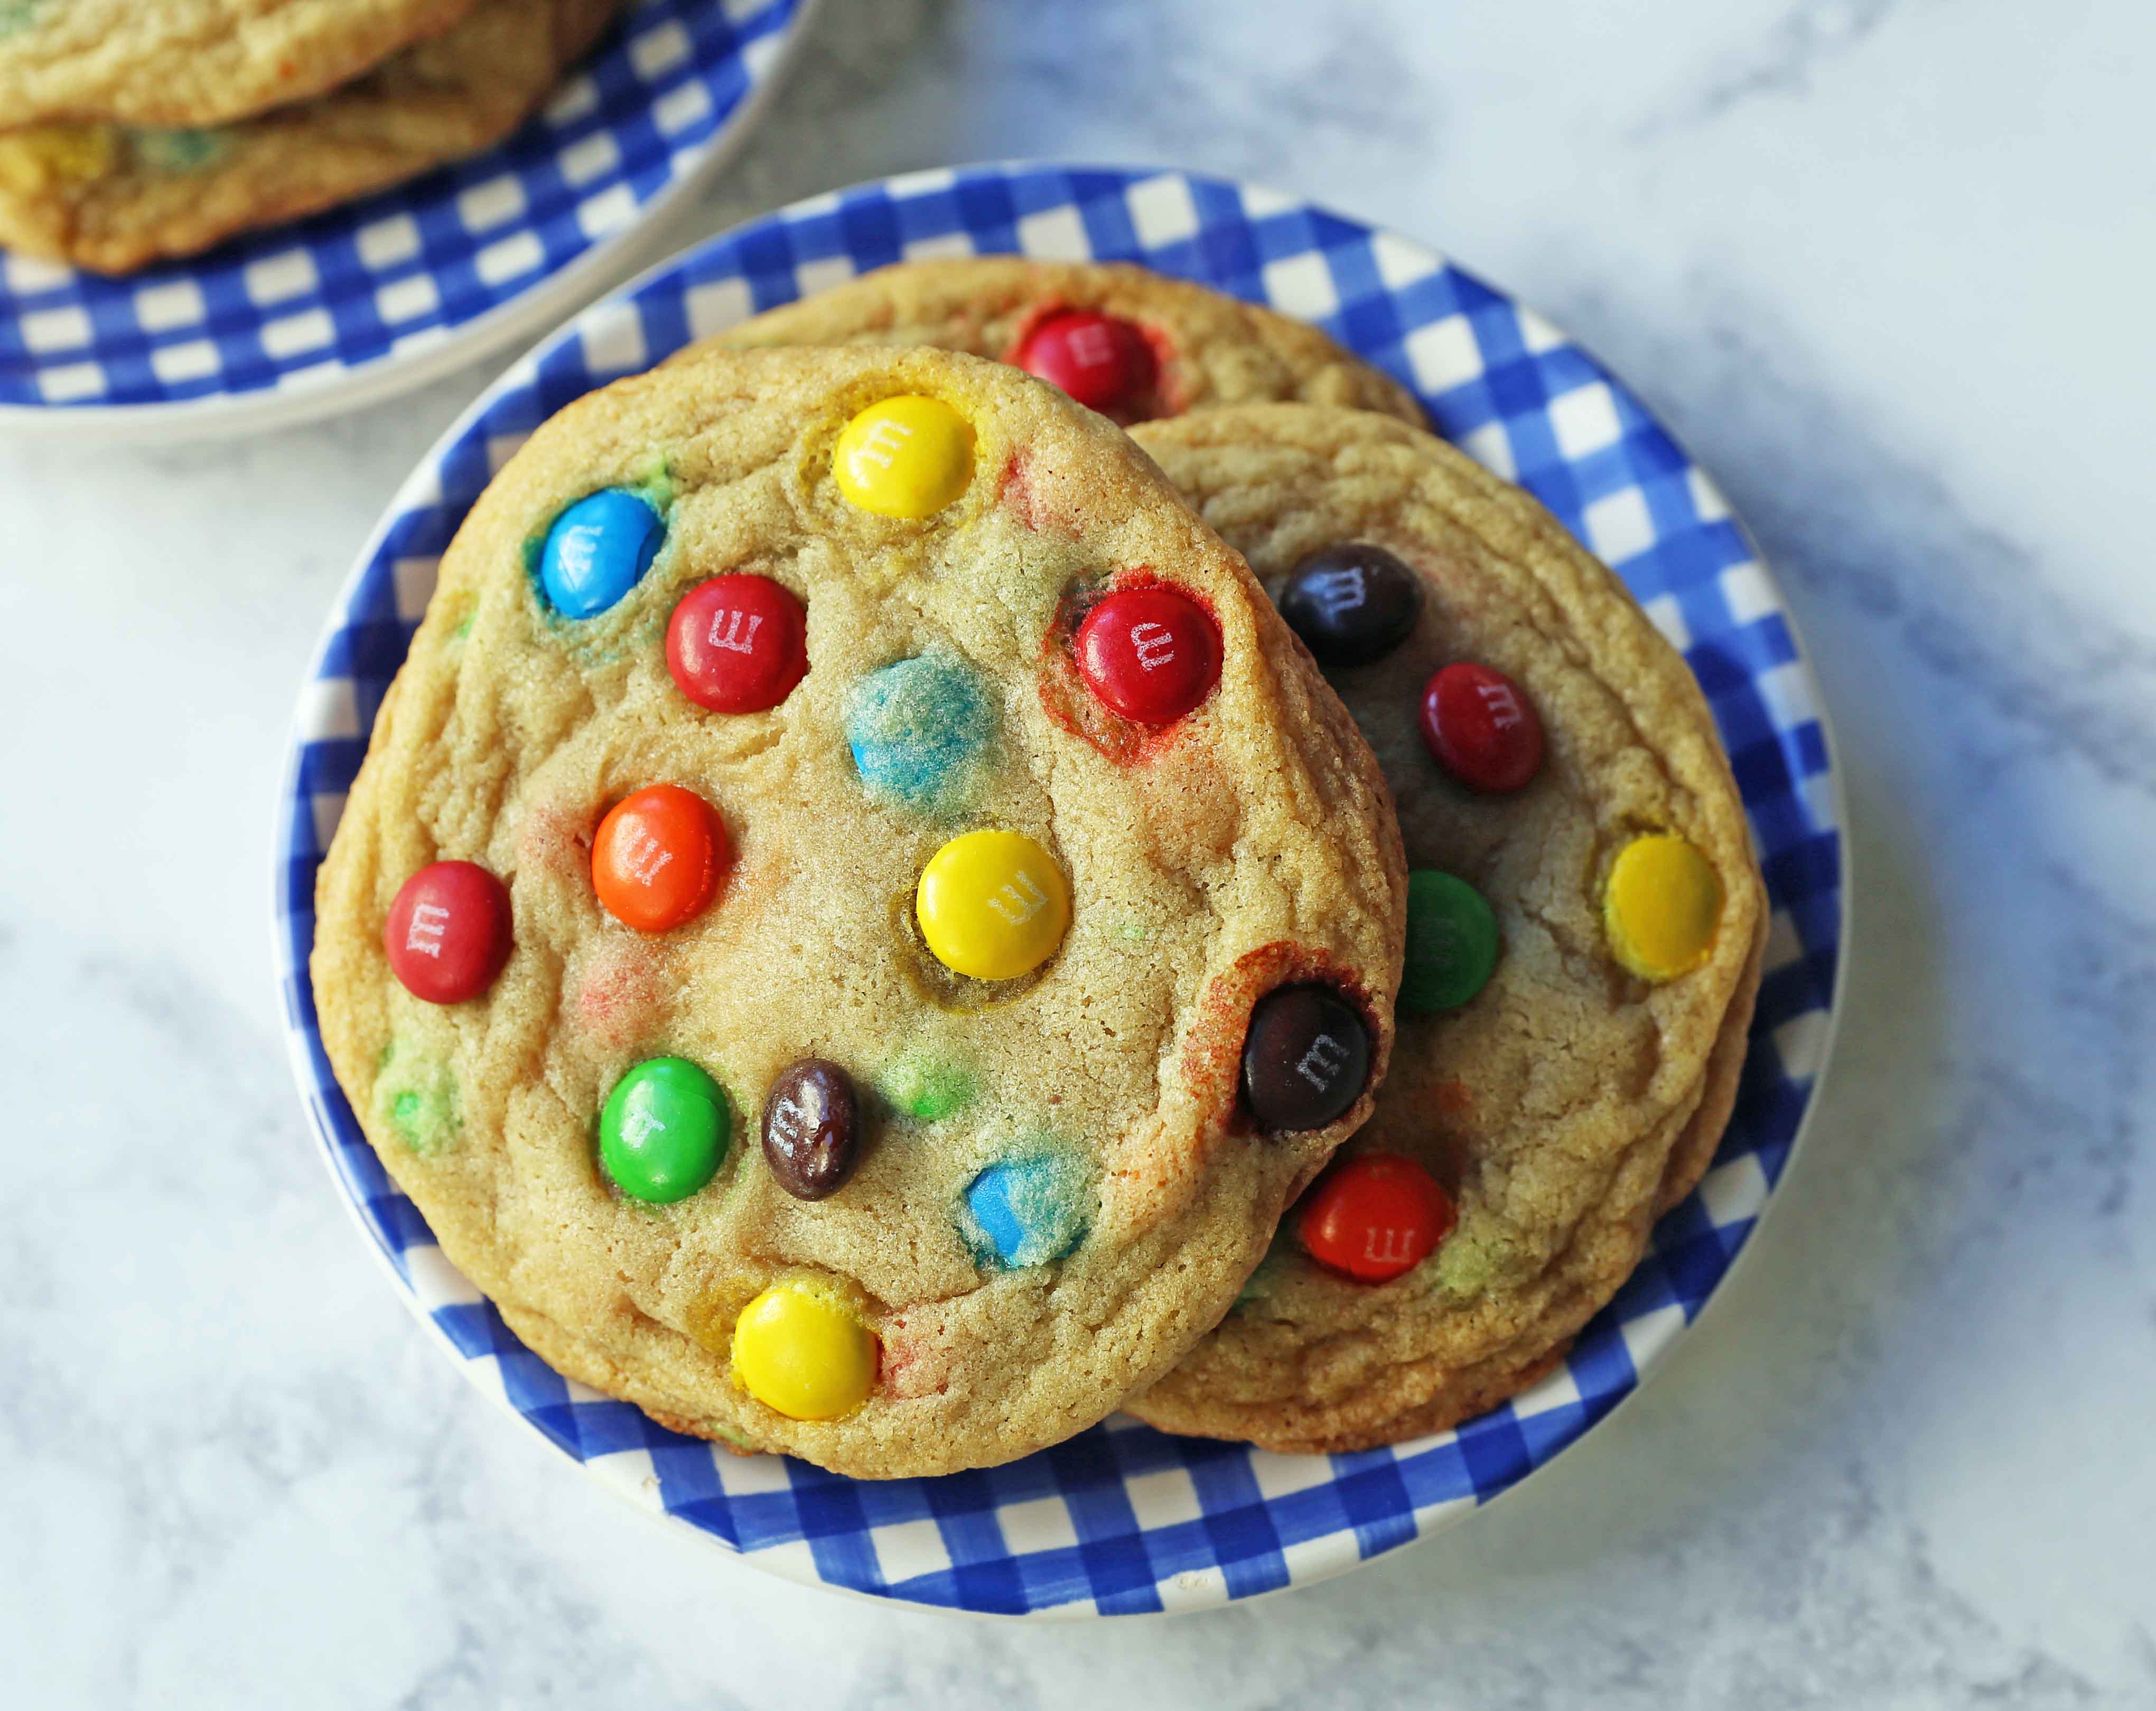 Soft and Chewy M & M Cookies. The best M & M cookie recipe. How to make the perfect M & M cookie. www.modernhoney.com #cookie #cookies #m&mcookie #m&mcookies #dessert